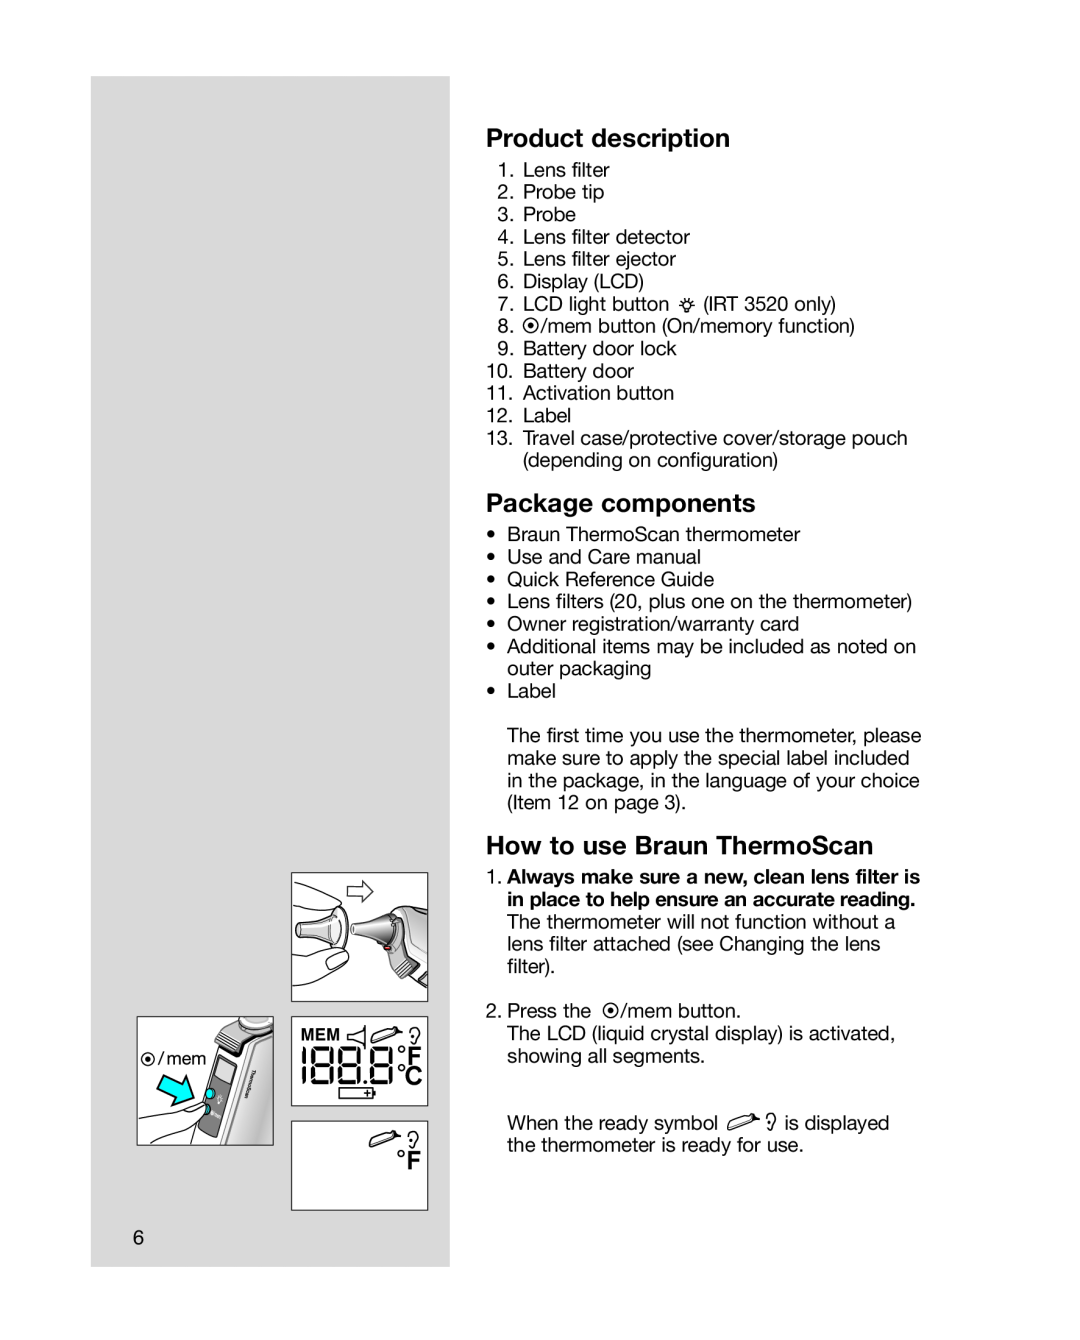 Braun 6012, 6013 manual Product description, Package components, How to use Braun ThermoScan 